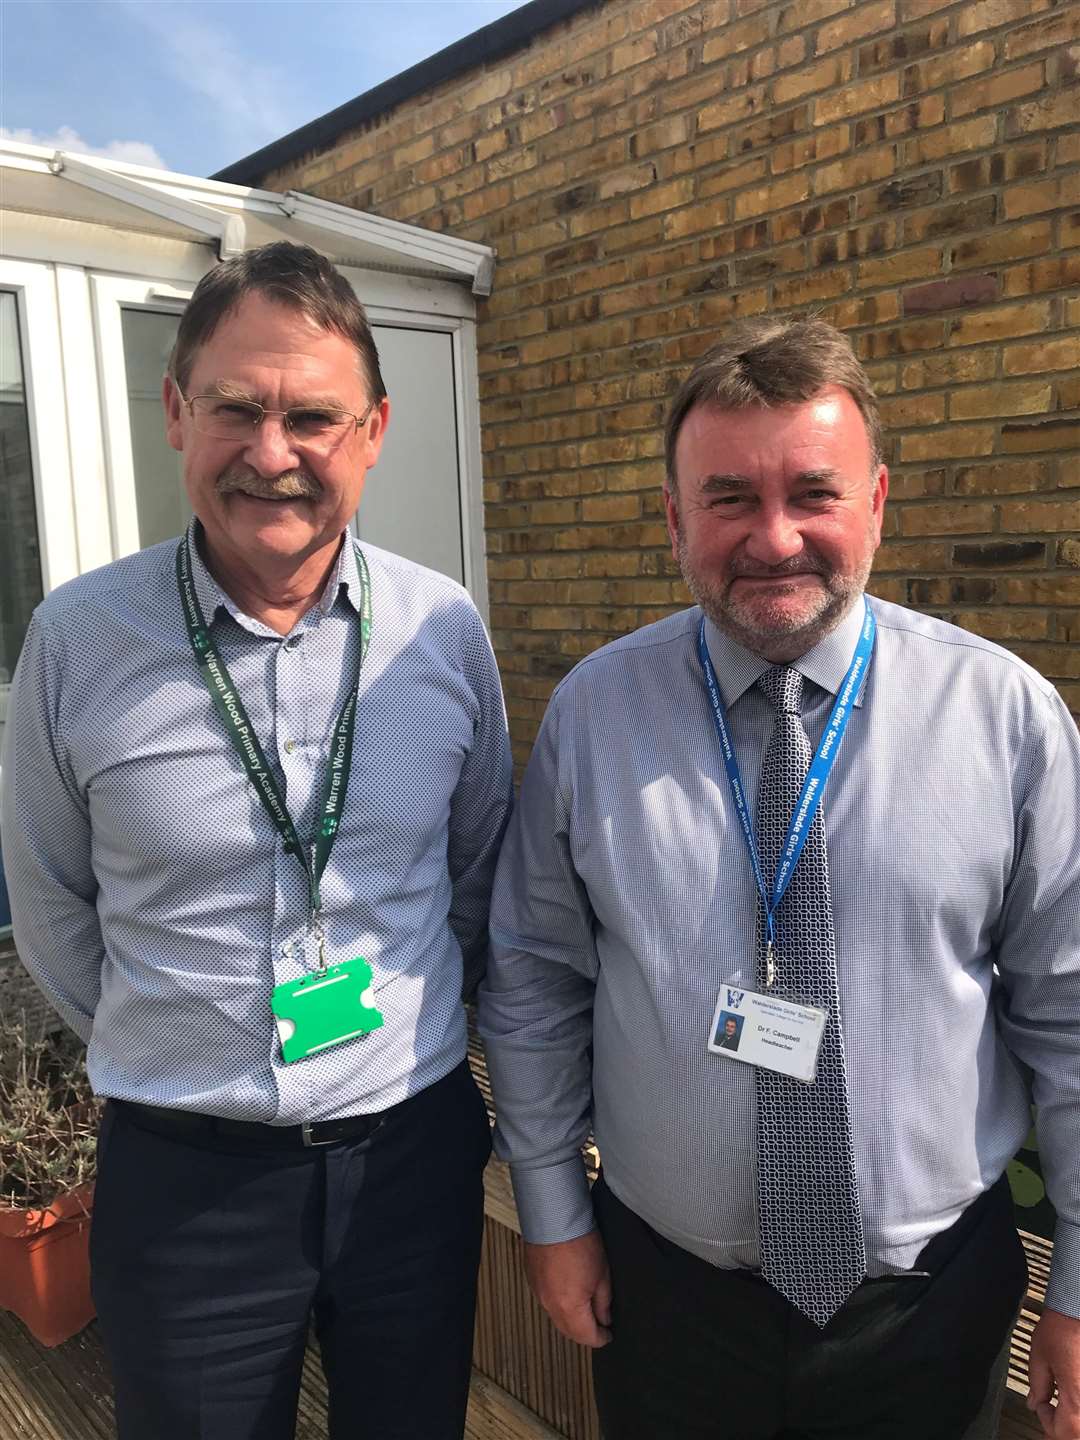 Andrew Reese, CEO Greenacre Academy Trust and Dr Fraser Campbell, Head of Walderslade Girls School (2) (3984516)